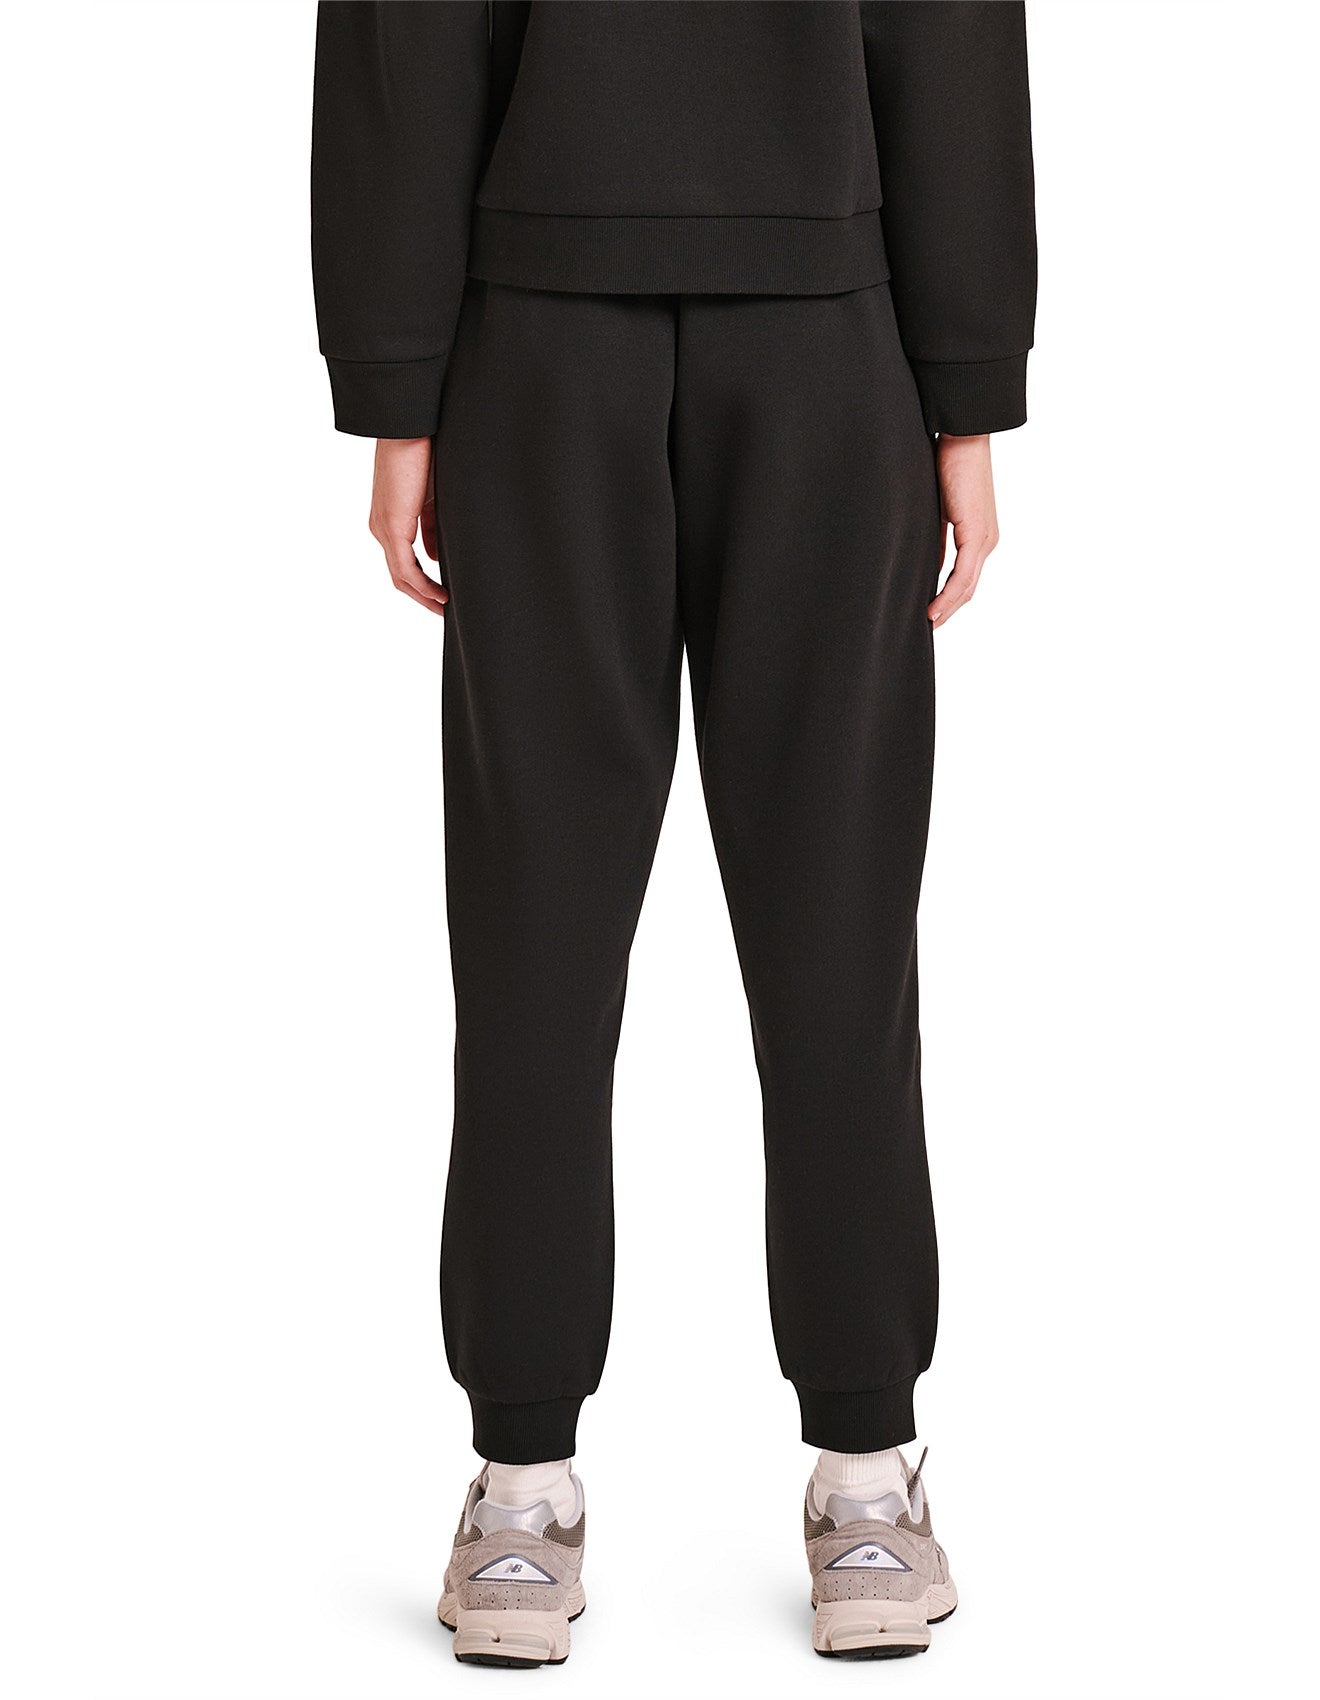 Nude Lucy - CARTER CLASSIC TRACKPANT Black